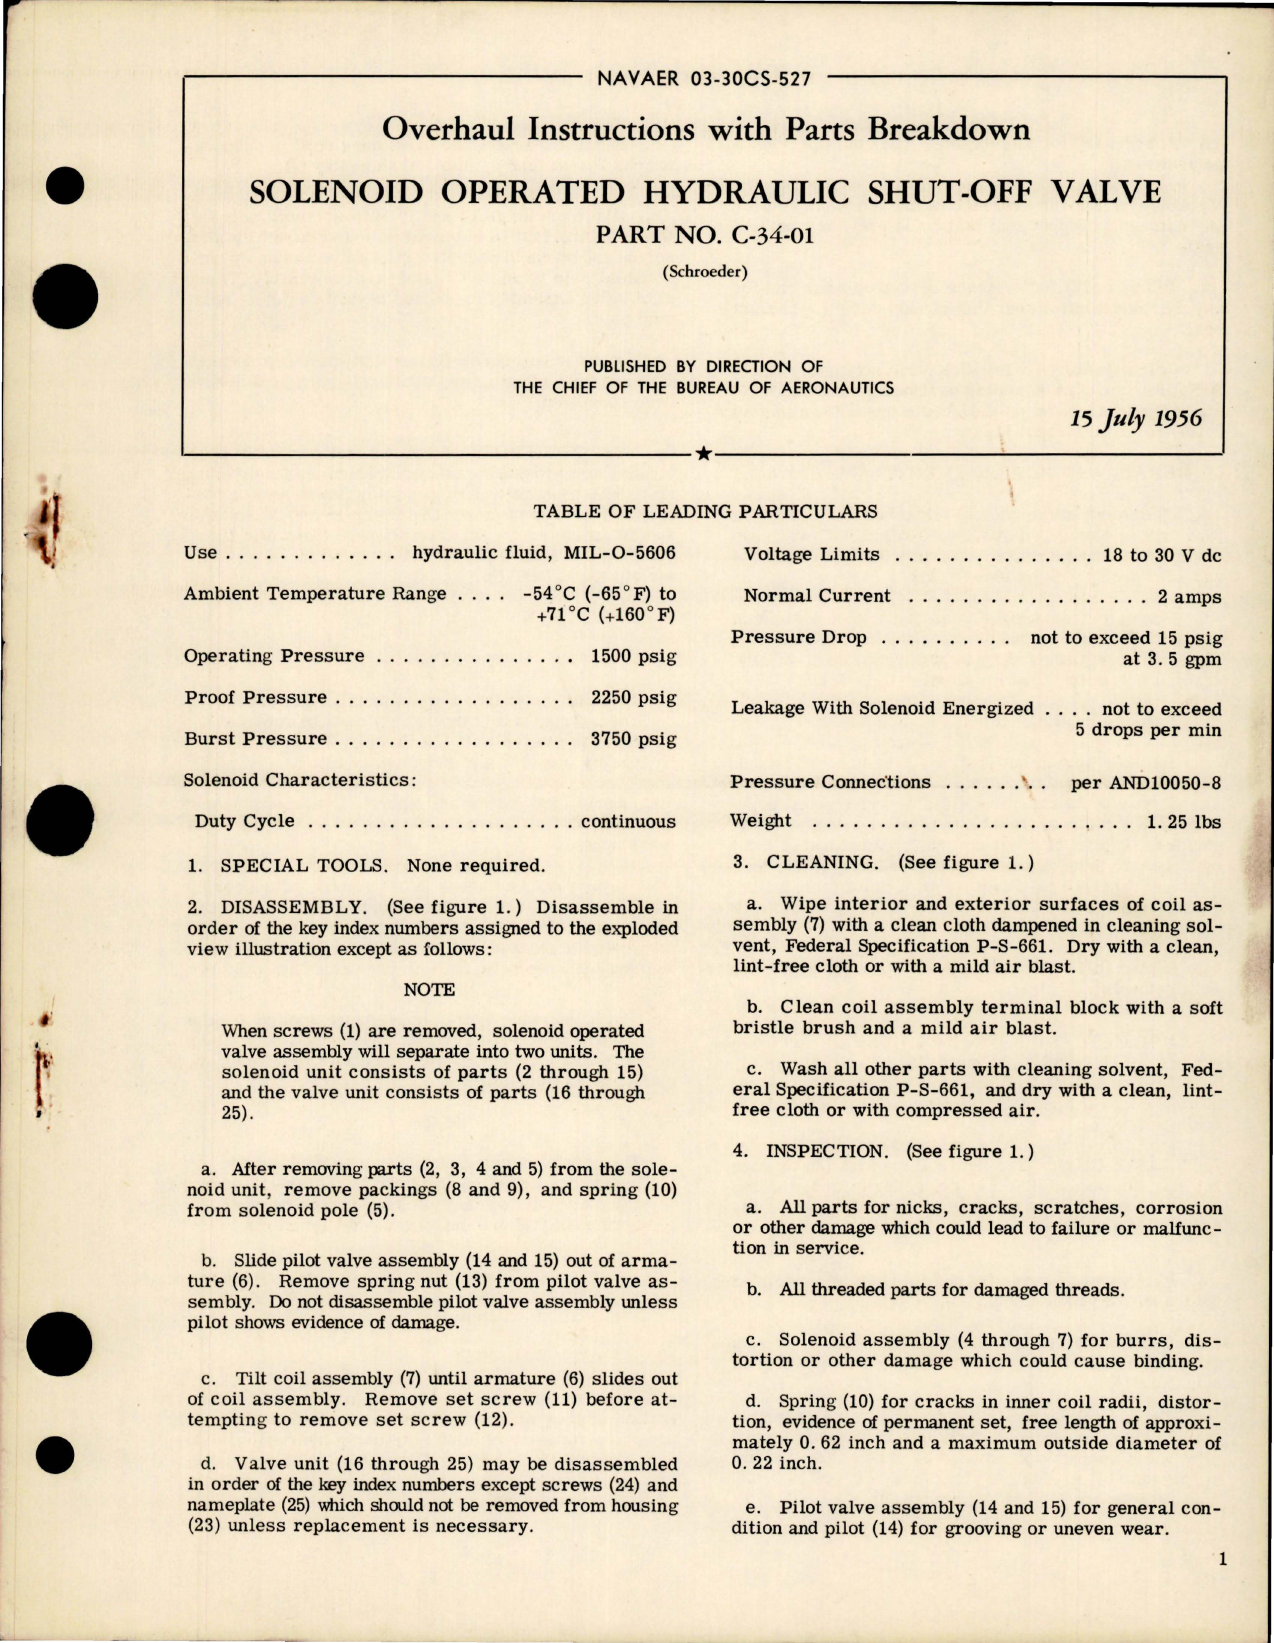 Sample page 1 from AirCorps Library document: Overhaul Instructions with Parts Breakdown for Solenoid Operated Hydraulic Shut-Off Valve - Part C-34-01